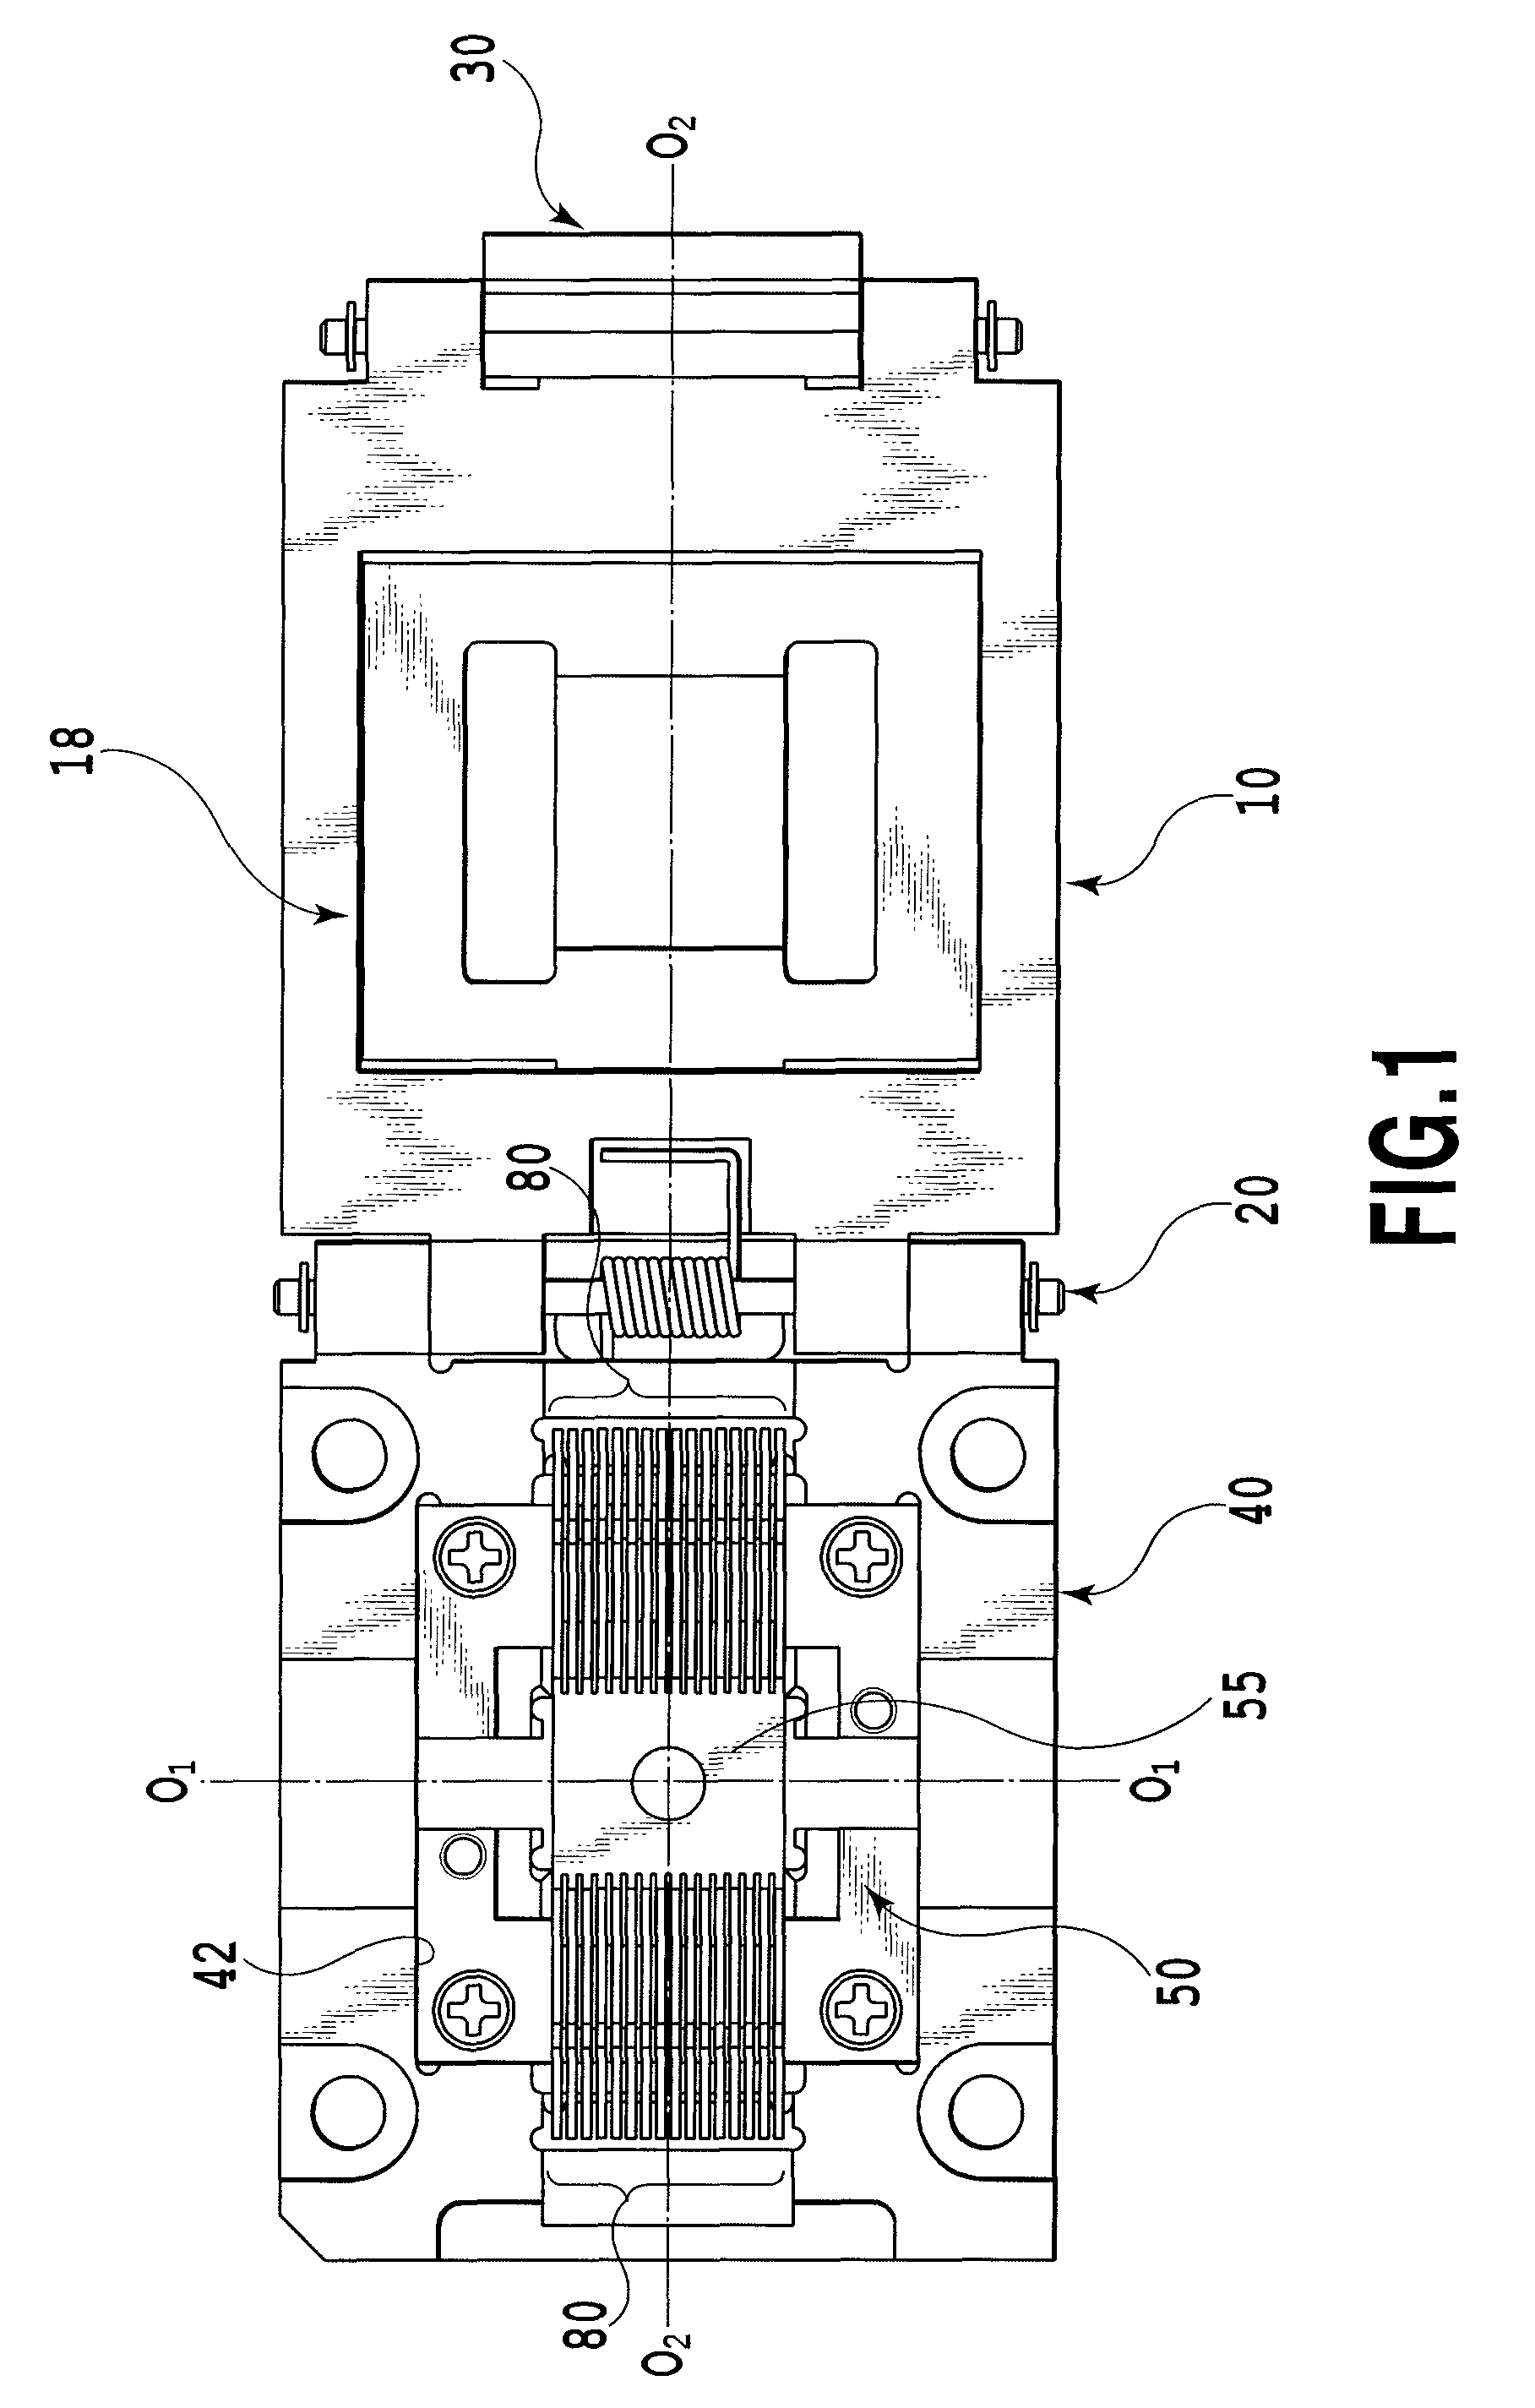 Electric connecting apparatus